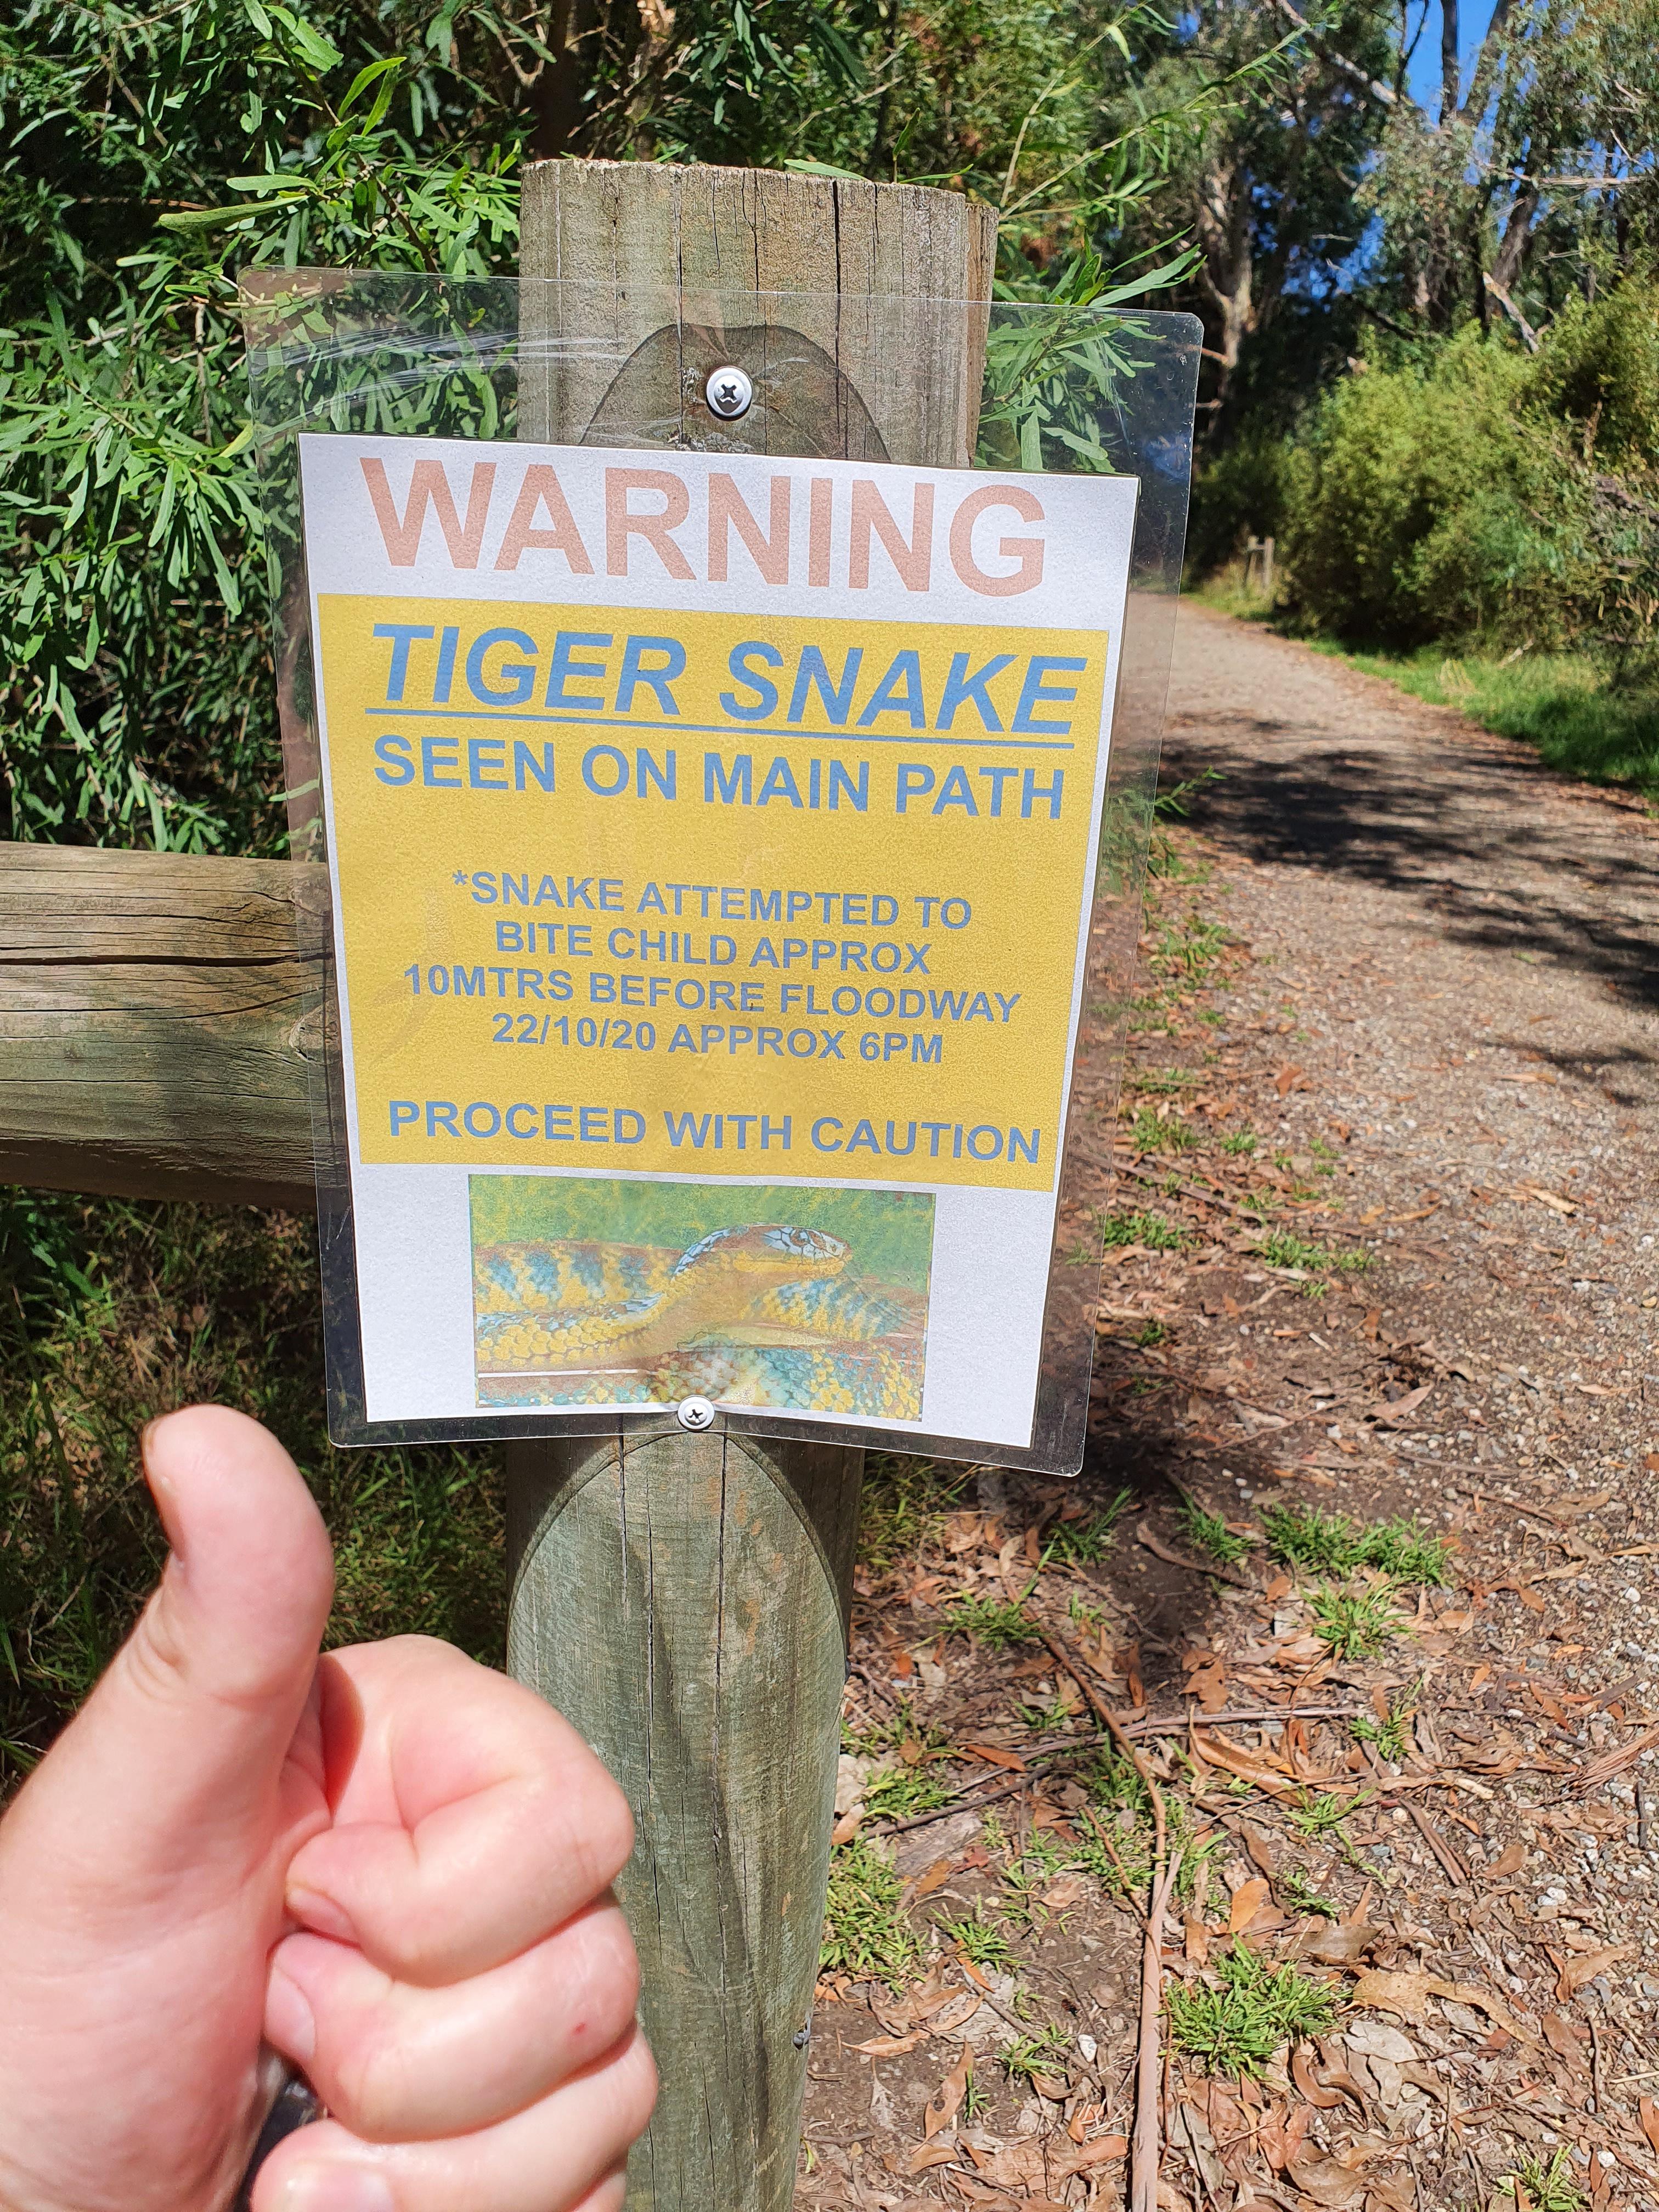 tree - Warning Tiger Snake Seen On Main Path Snake Attempted To Bite Child Approx Omtrs Before Floodway 221020 Approx Bpm Proceed With Caution